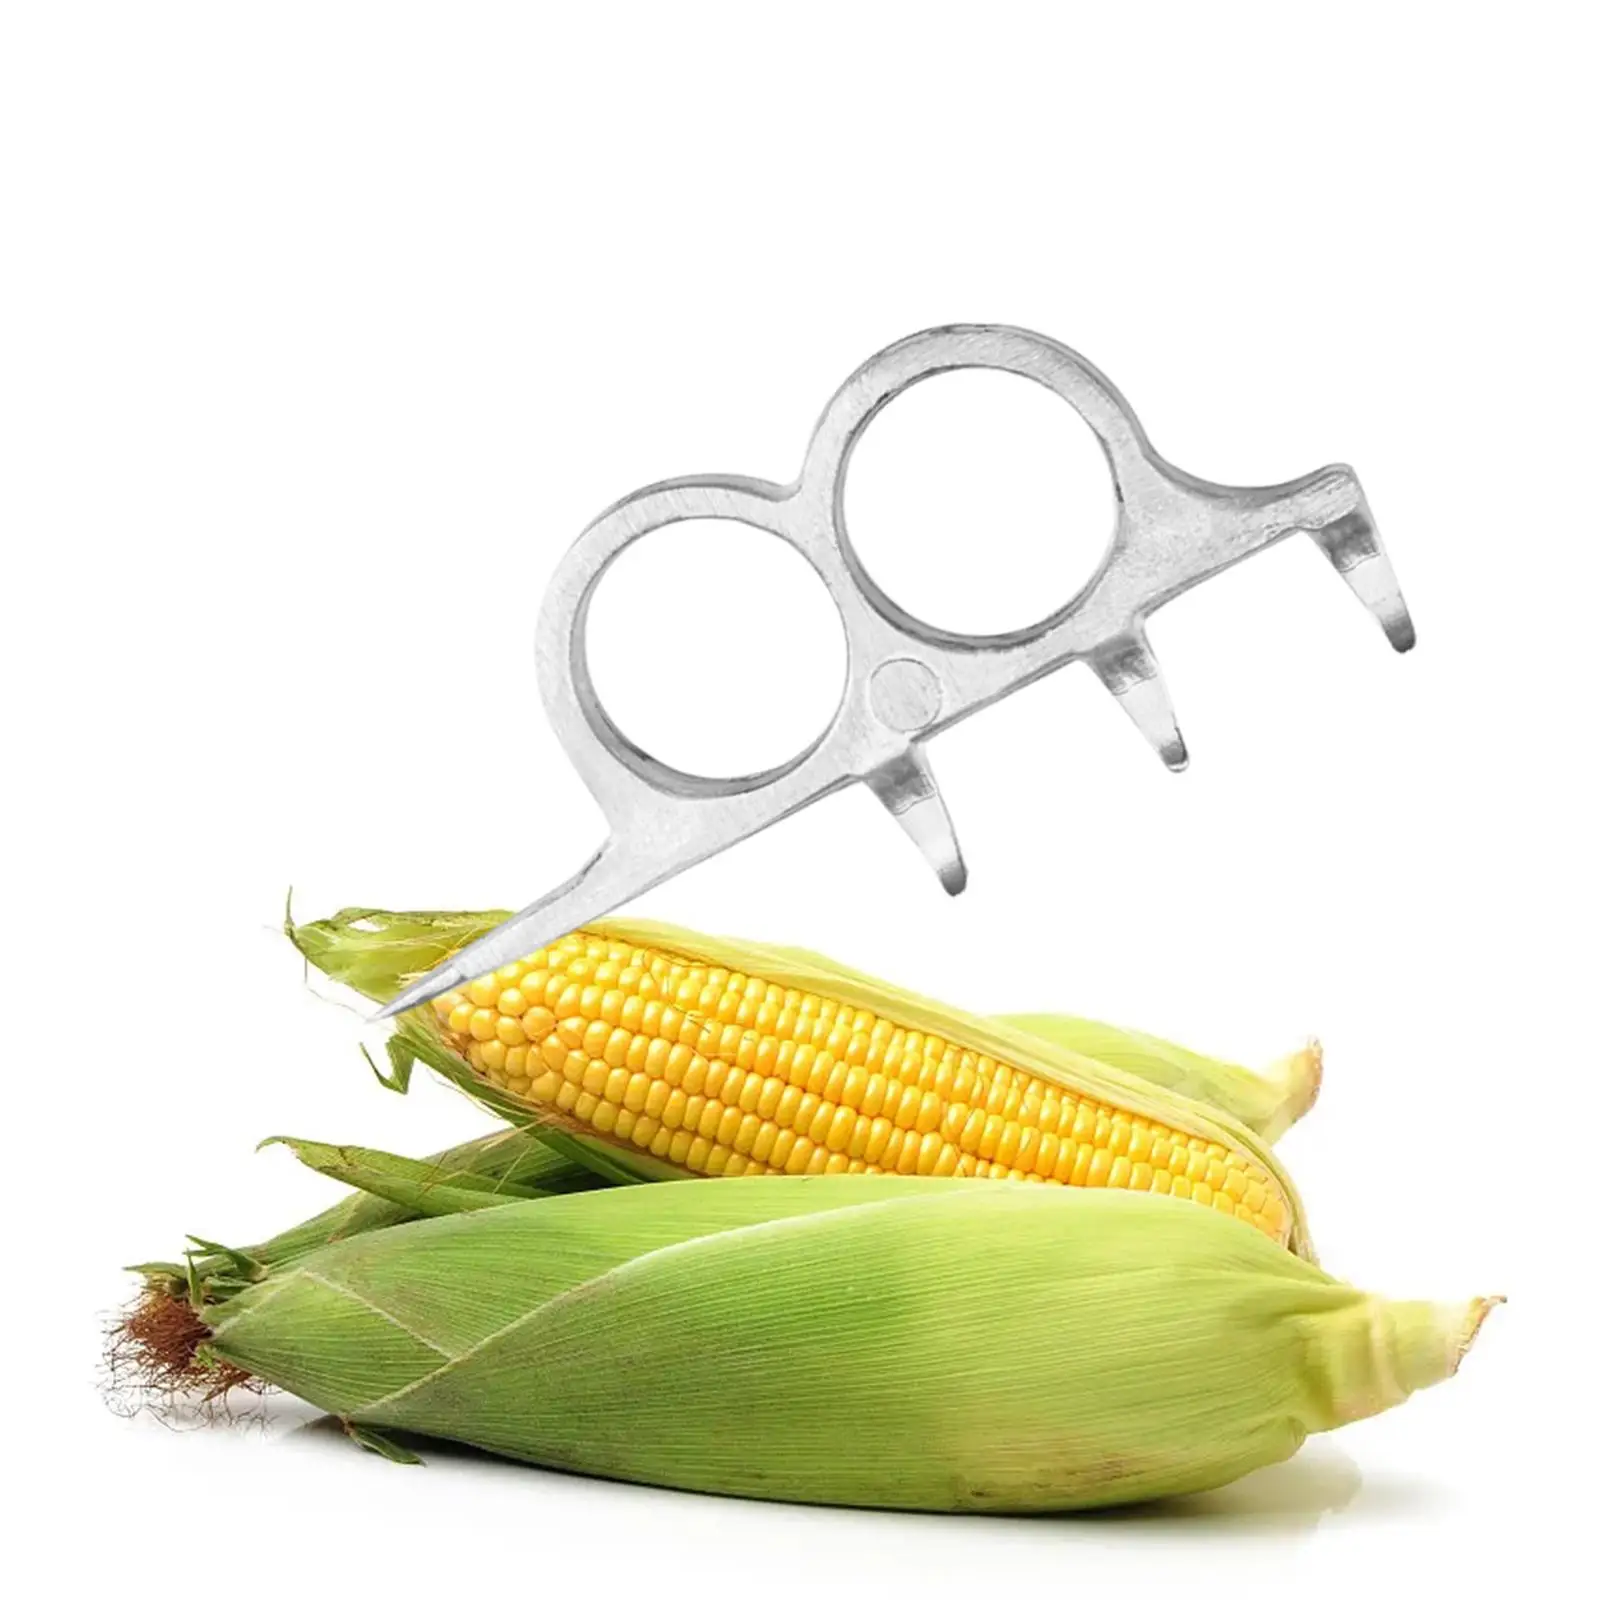 Coin Remover Tool Practical Quick Peeling Quick Corn Peeling Cutter for Groceries Chefs Cooking Kitchen Gadget Agricultural